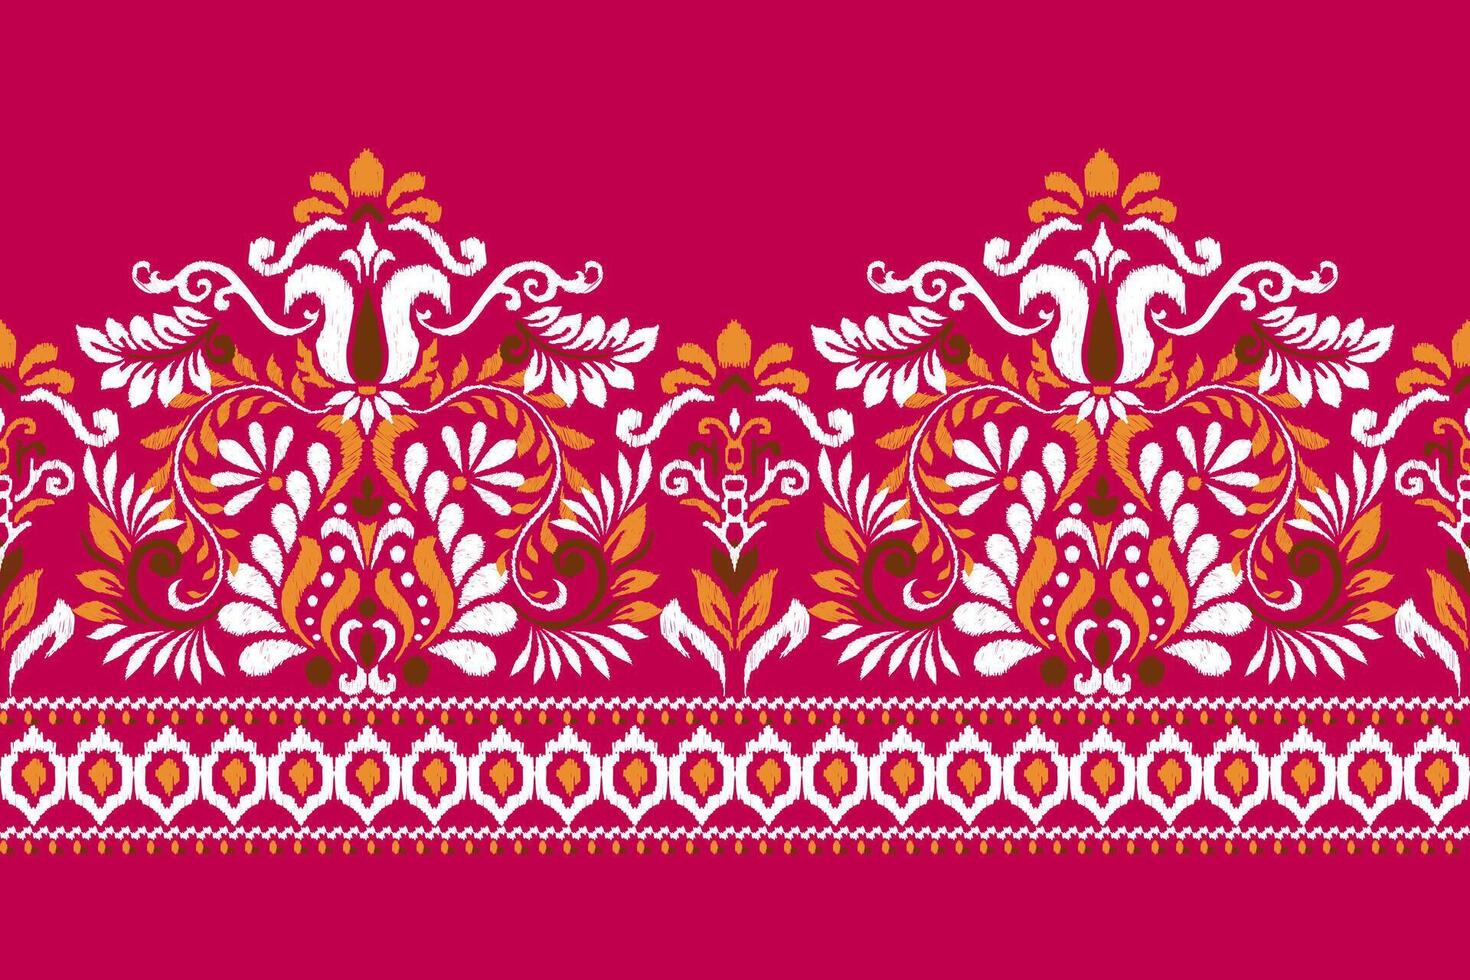 Ikat floral pattern traditional on Persian background vector illustration.Ikat ethnic oriental embroidery,Aztec style,abstract background.design for texture,fabric,clothing,wrapping,decoration,sarong.